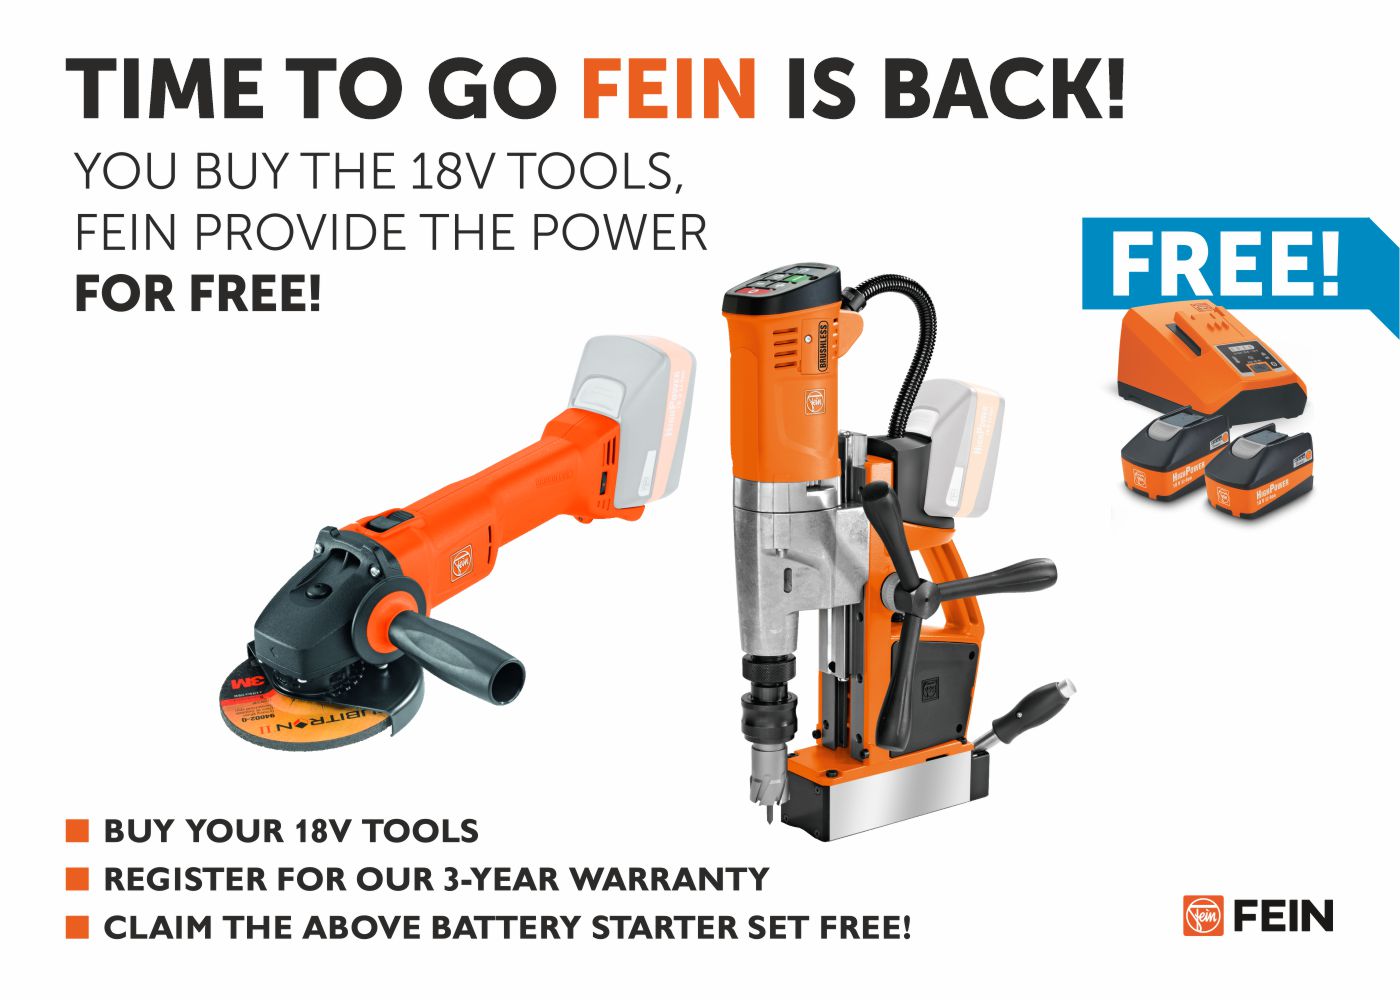 Time to Go FEIN - Free Battery or Accessory Pack Promo 2022